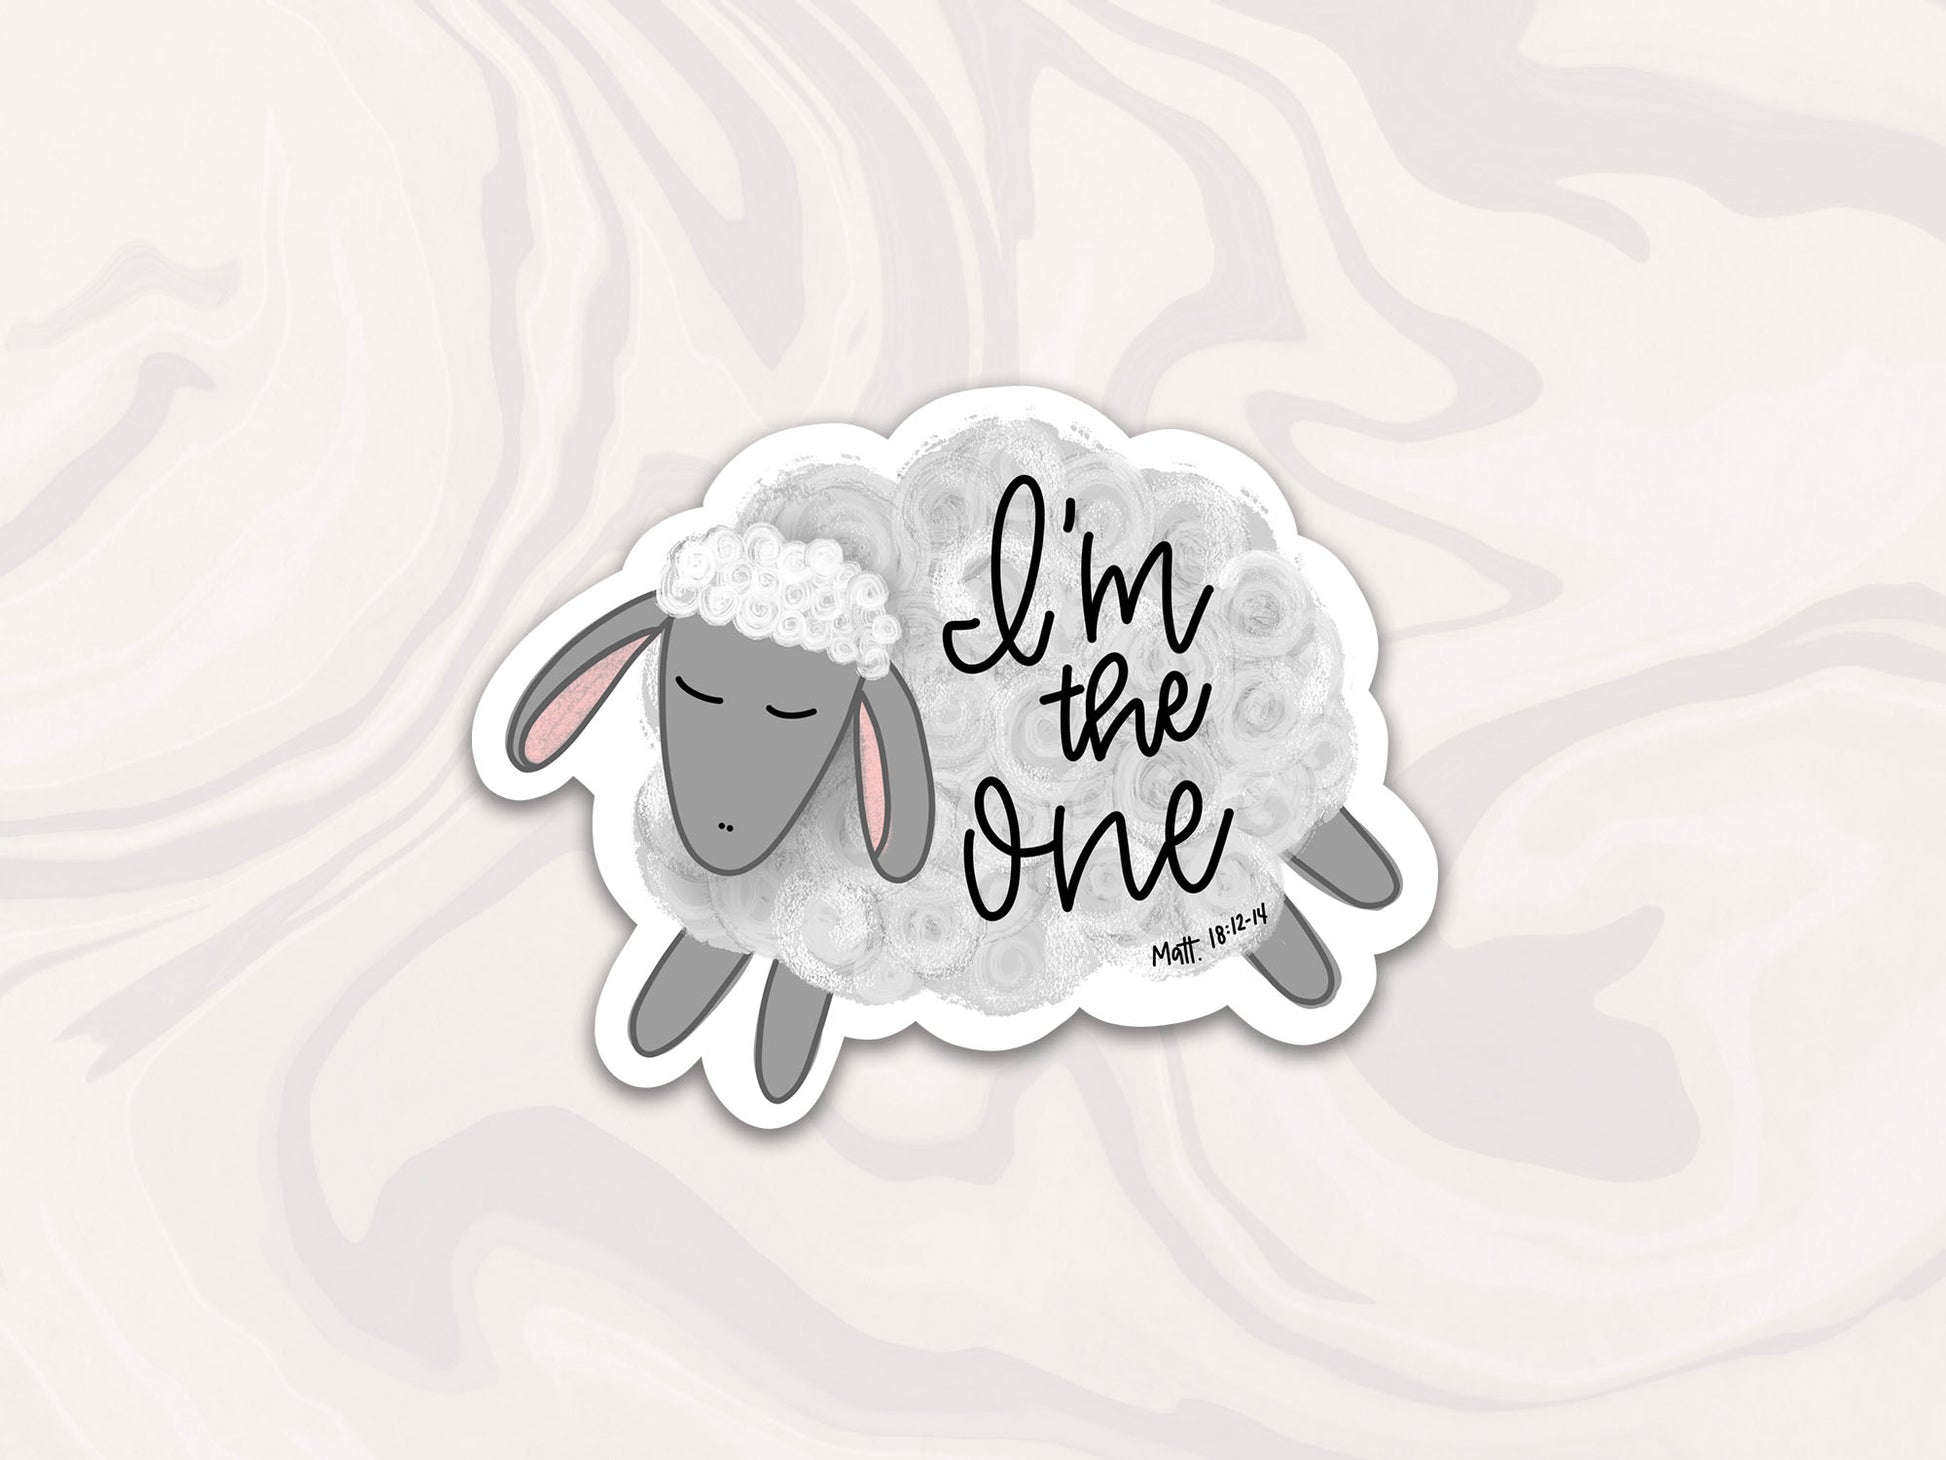 sheep sticker that says I'm the One referencing Matthew 18:12-14, Bible verse sticker